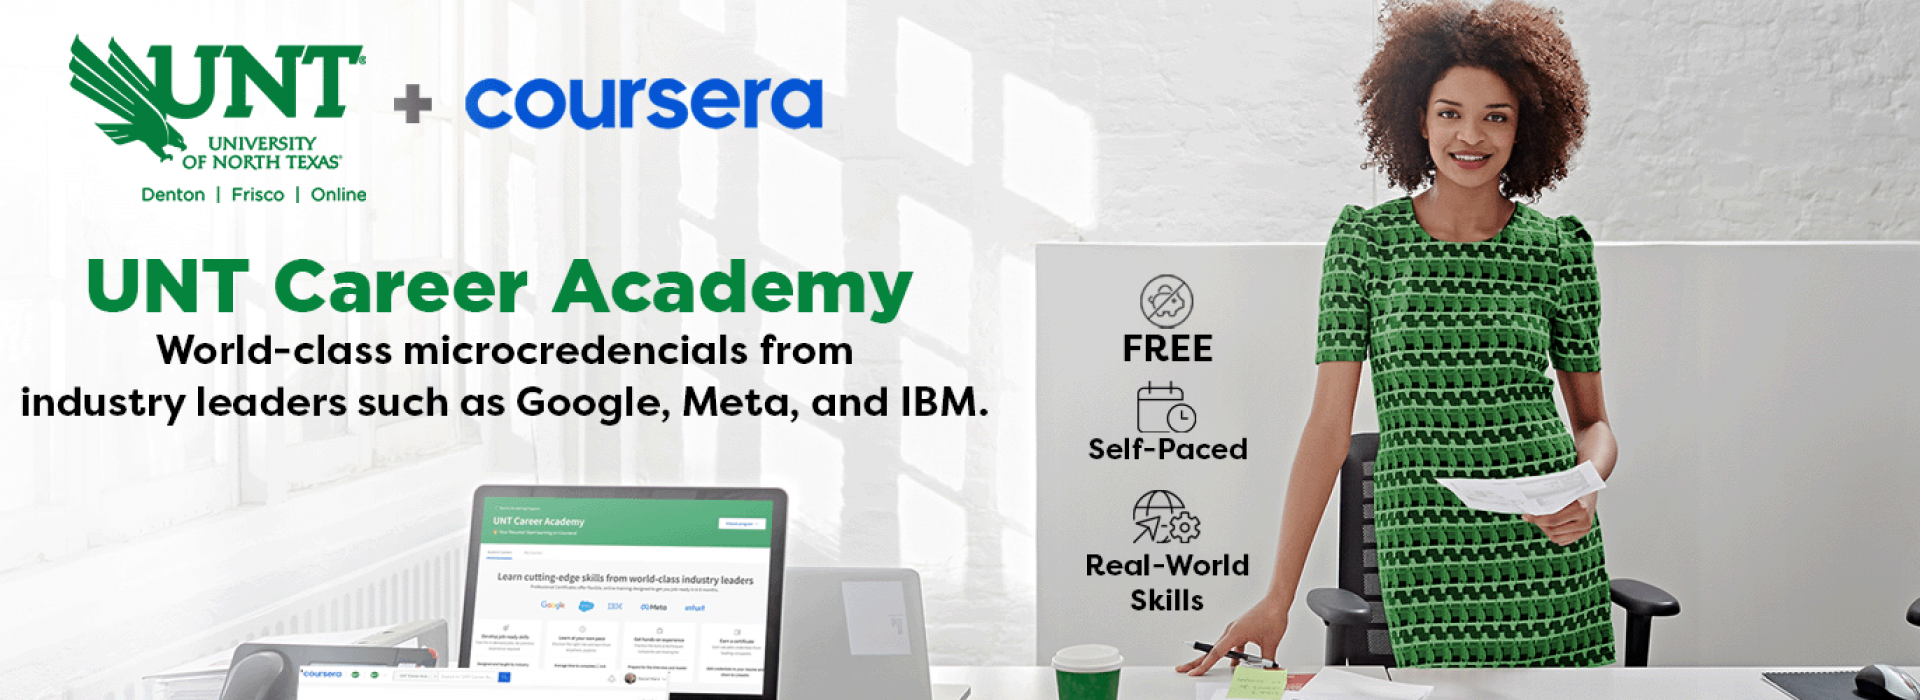 UNT + Coursera UNT Career Academy  Free, Self-paced, real world skills learn more 